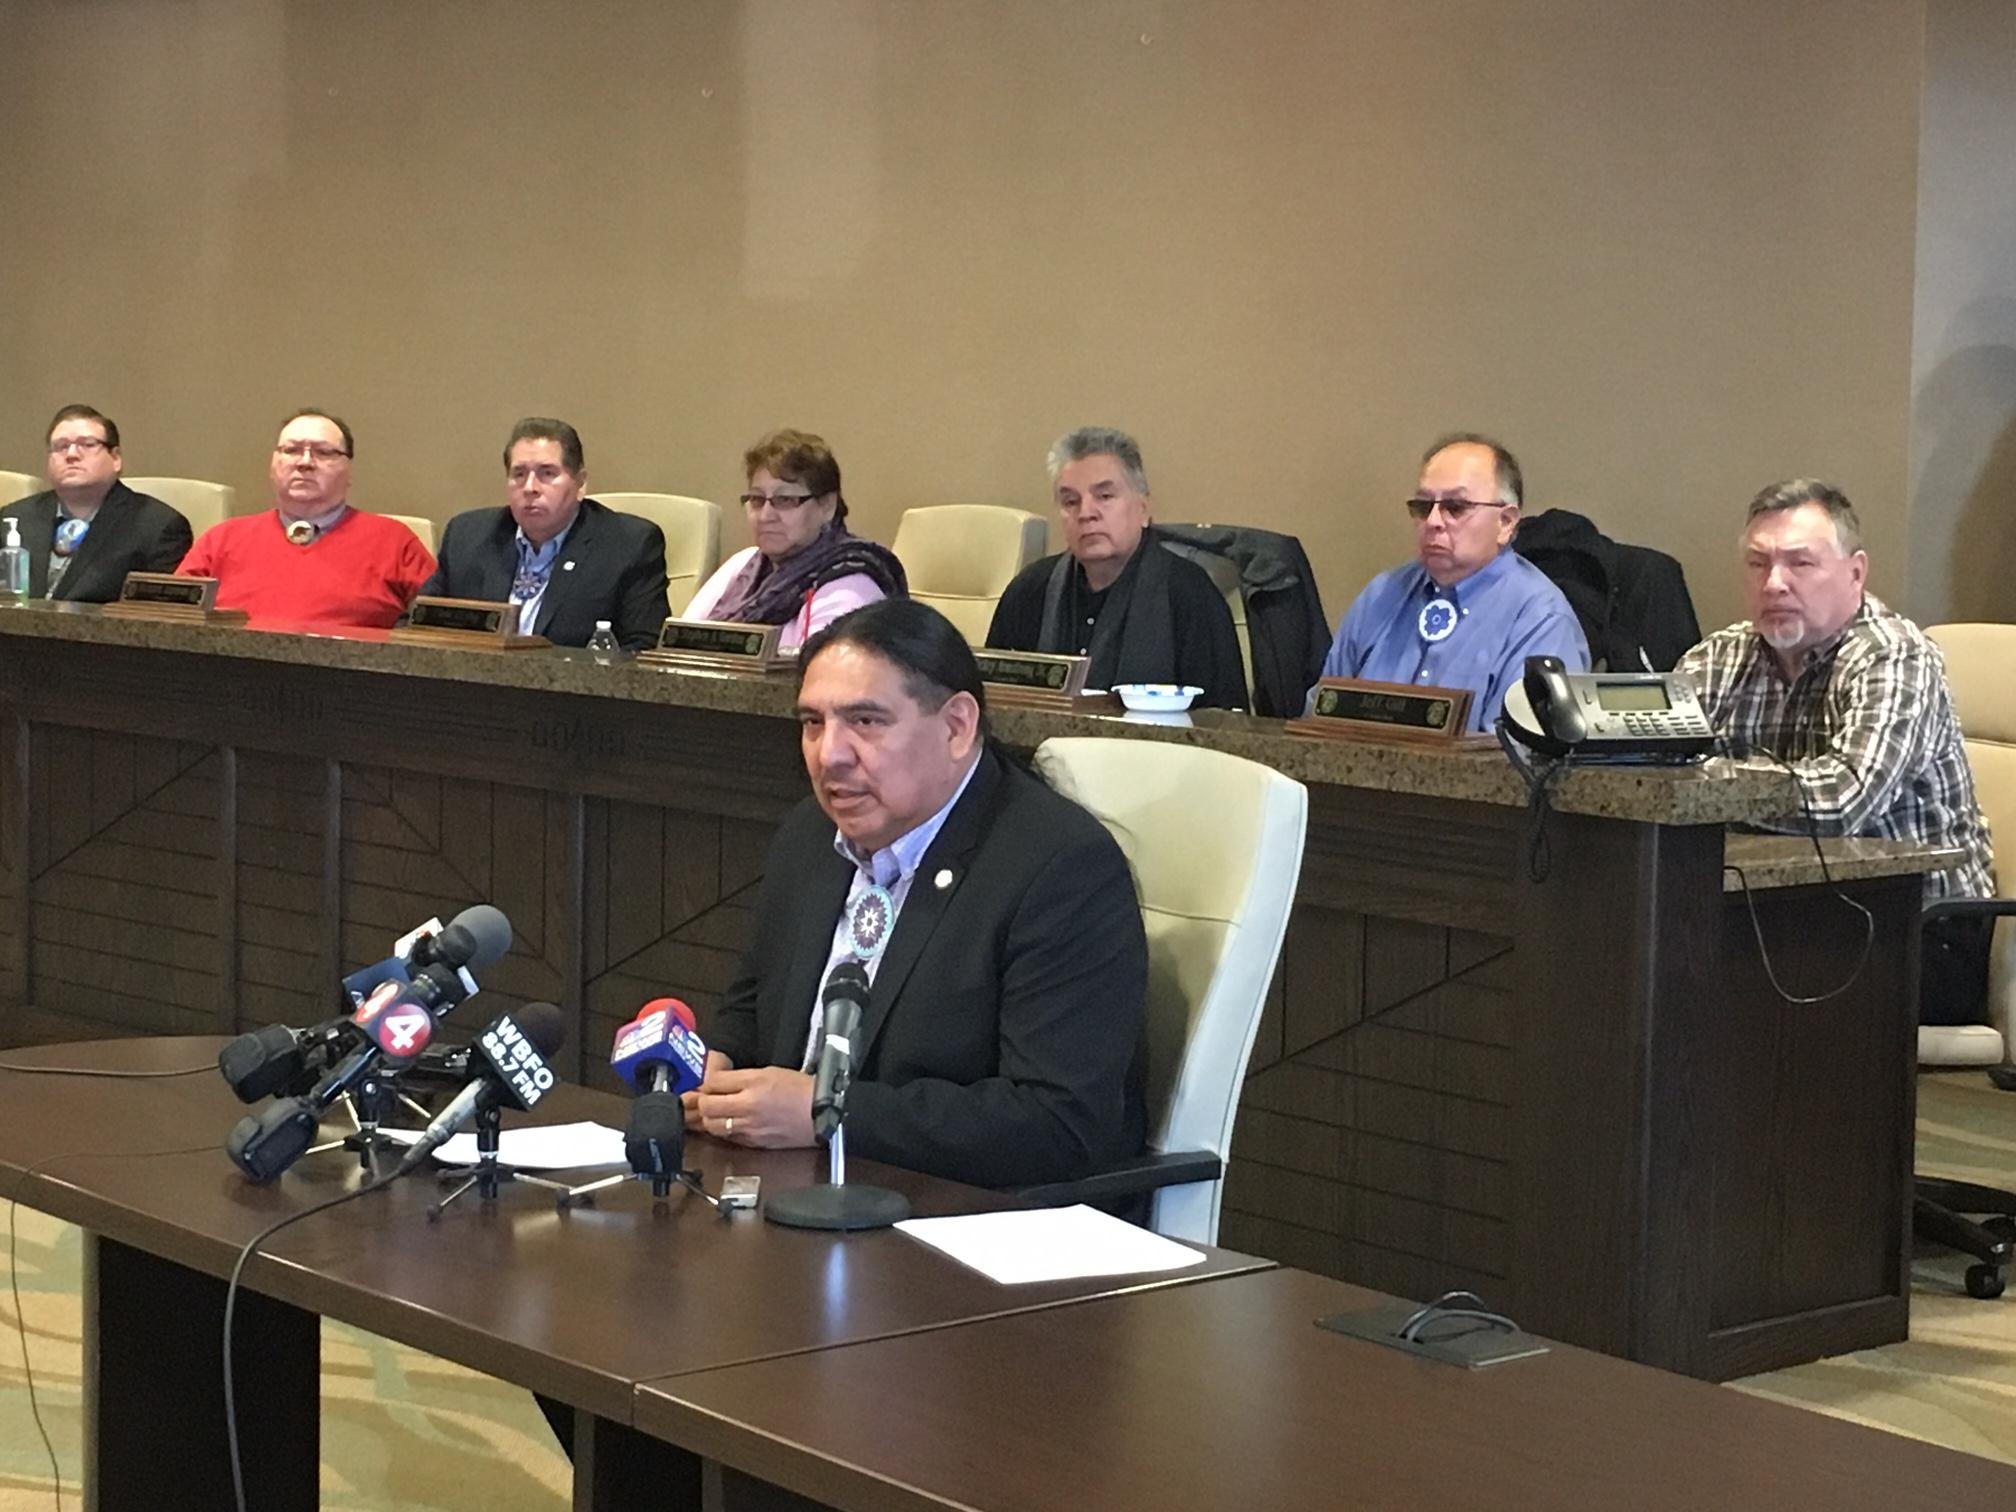 "We have good relationships with a lot of local leaders and the business community," Seneca Nation President Todd Gates told reporters, as council members look on.